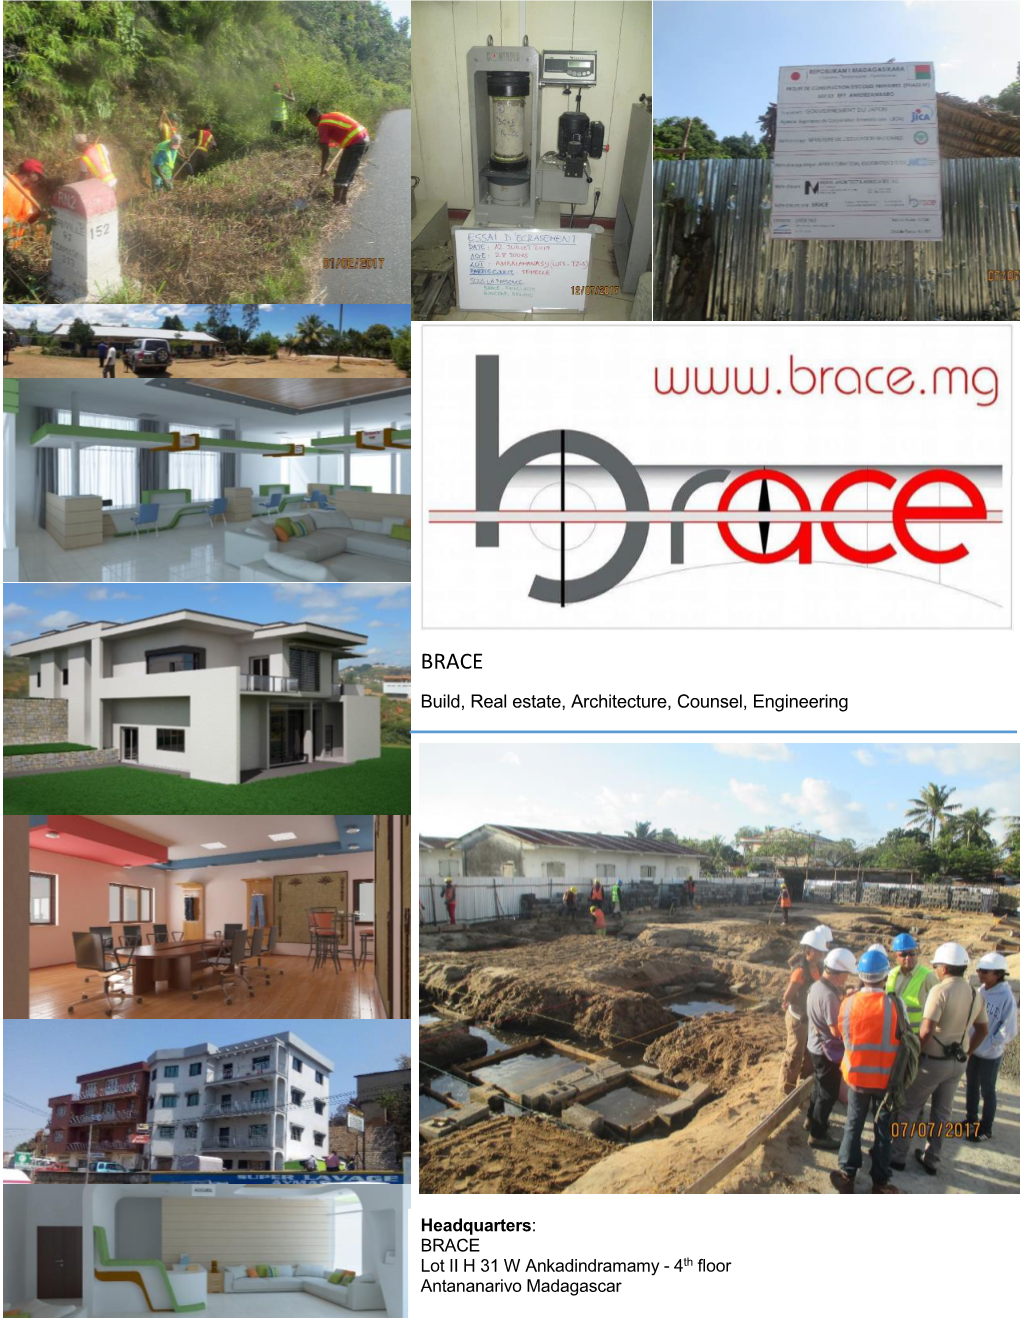 Build, Real Estate, Architecture, Counsel, Engineering